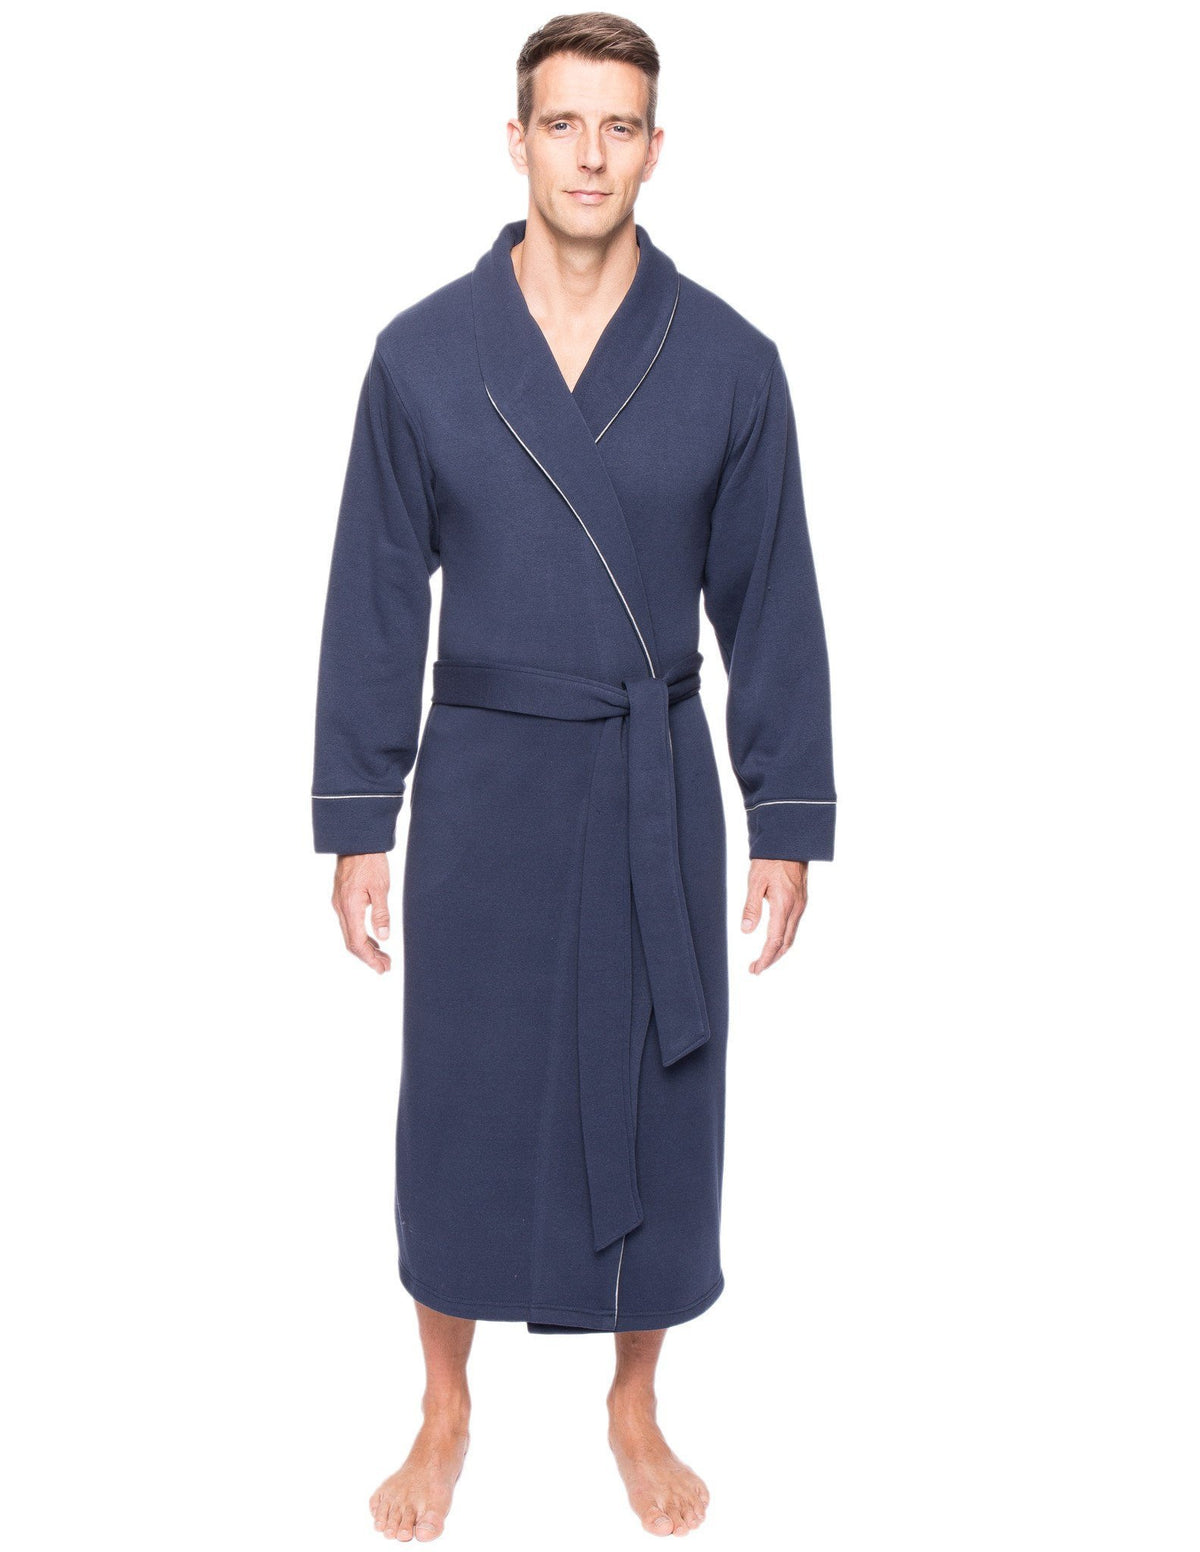 Men's Fleece Lined French Terry Robe - Navy